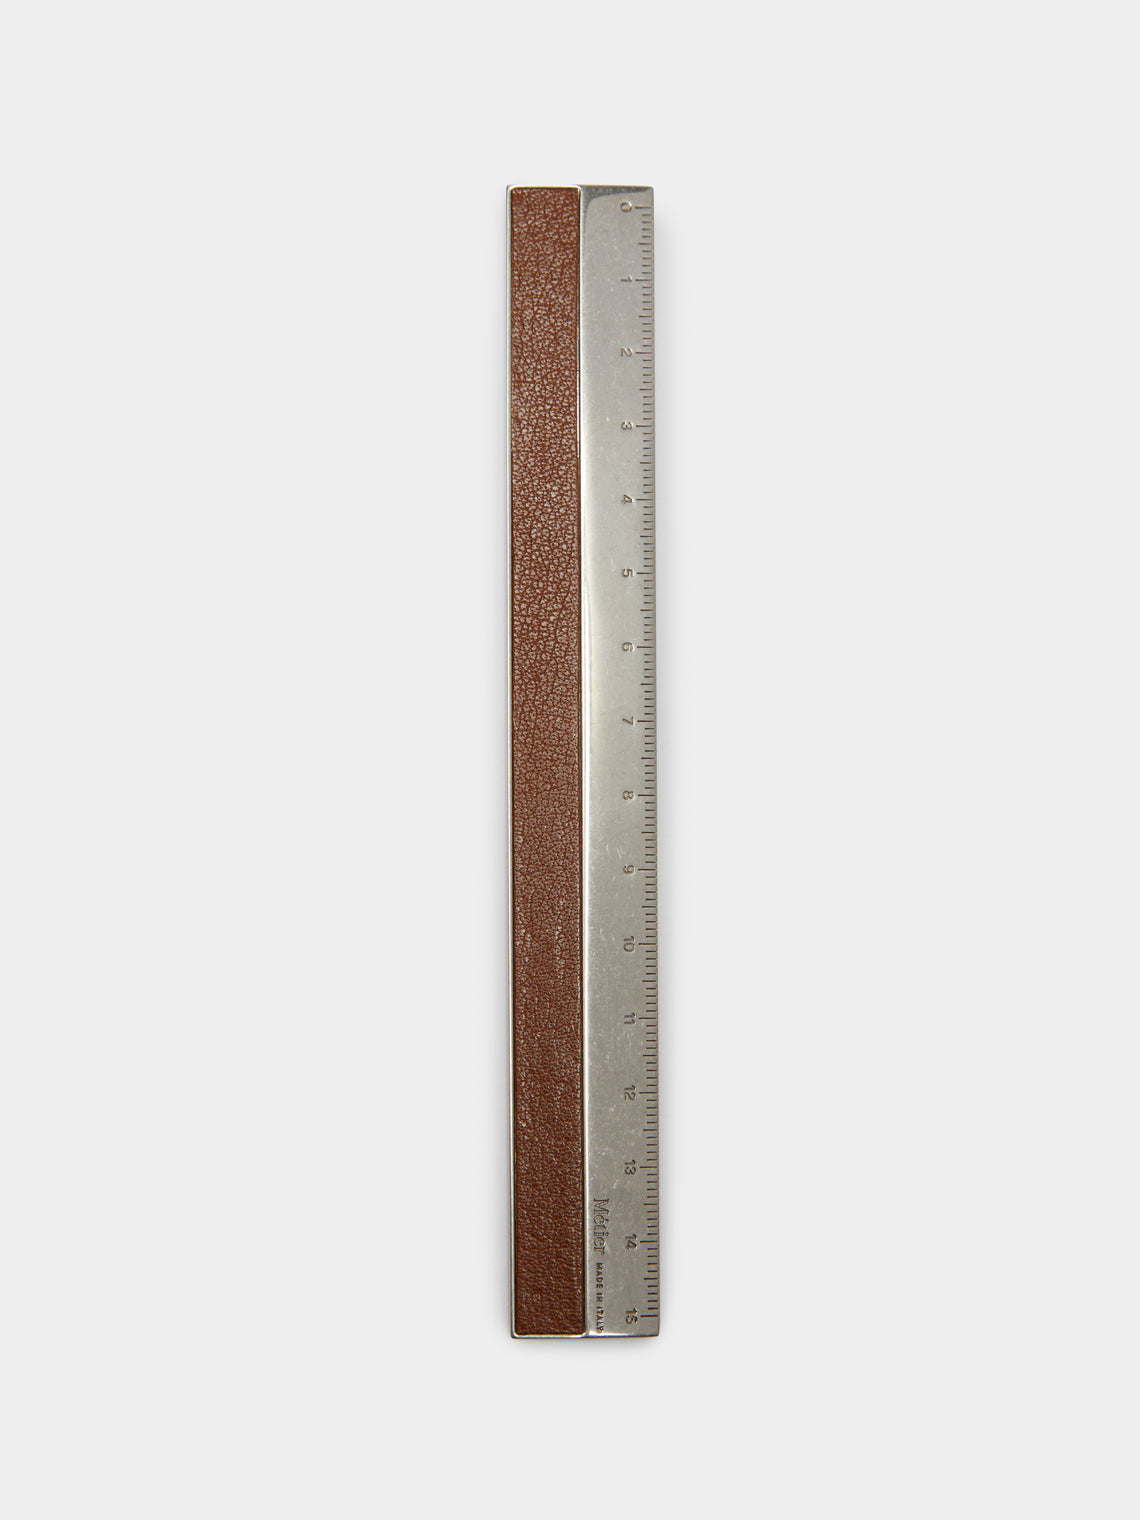 Métier - Brass and Leather Ruler - Brown - ABASK - 